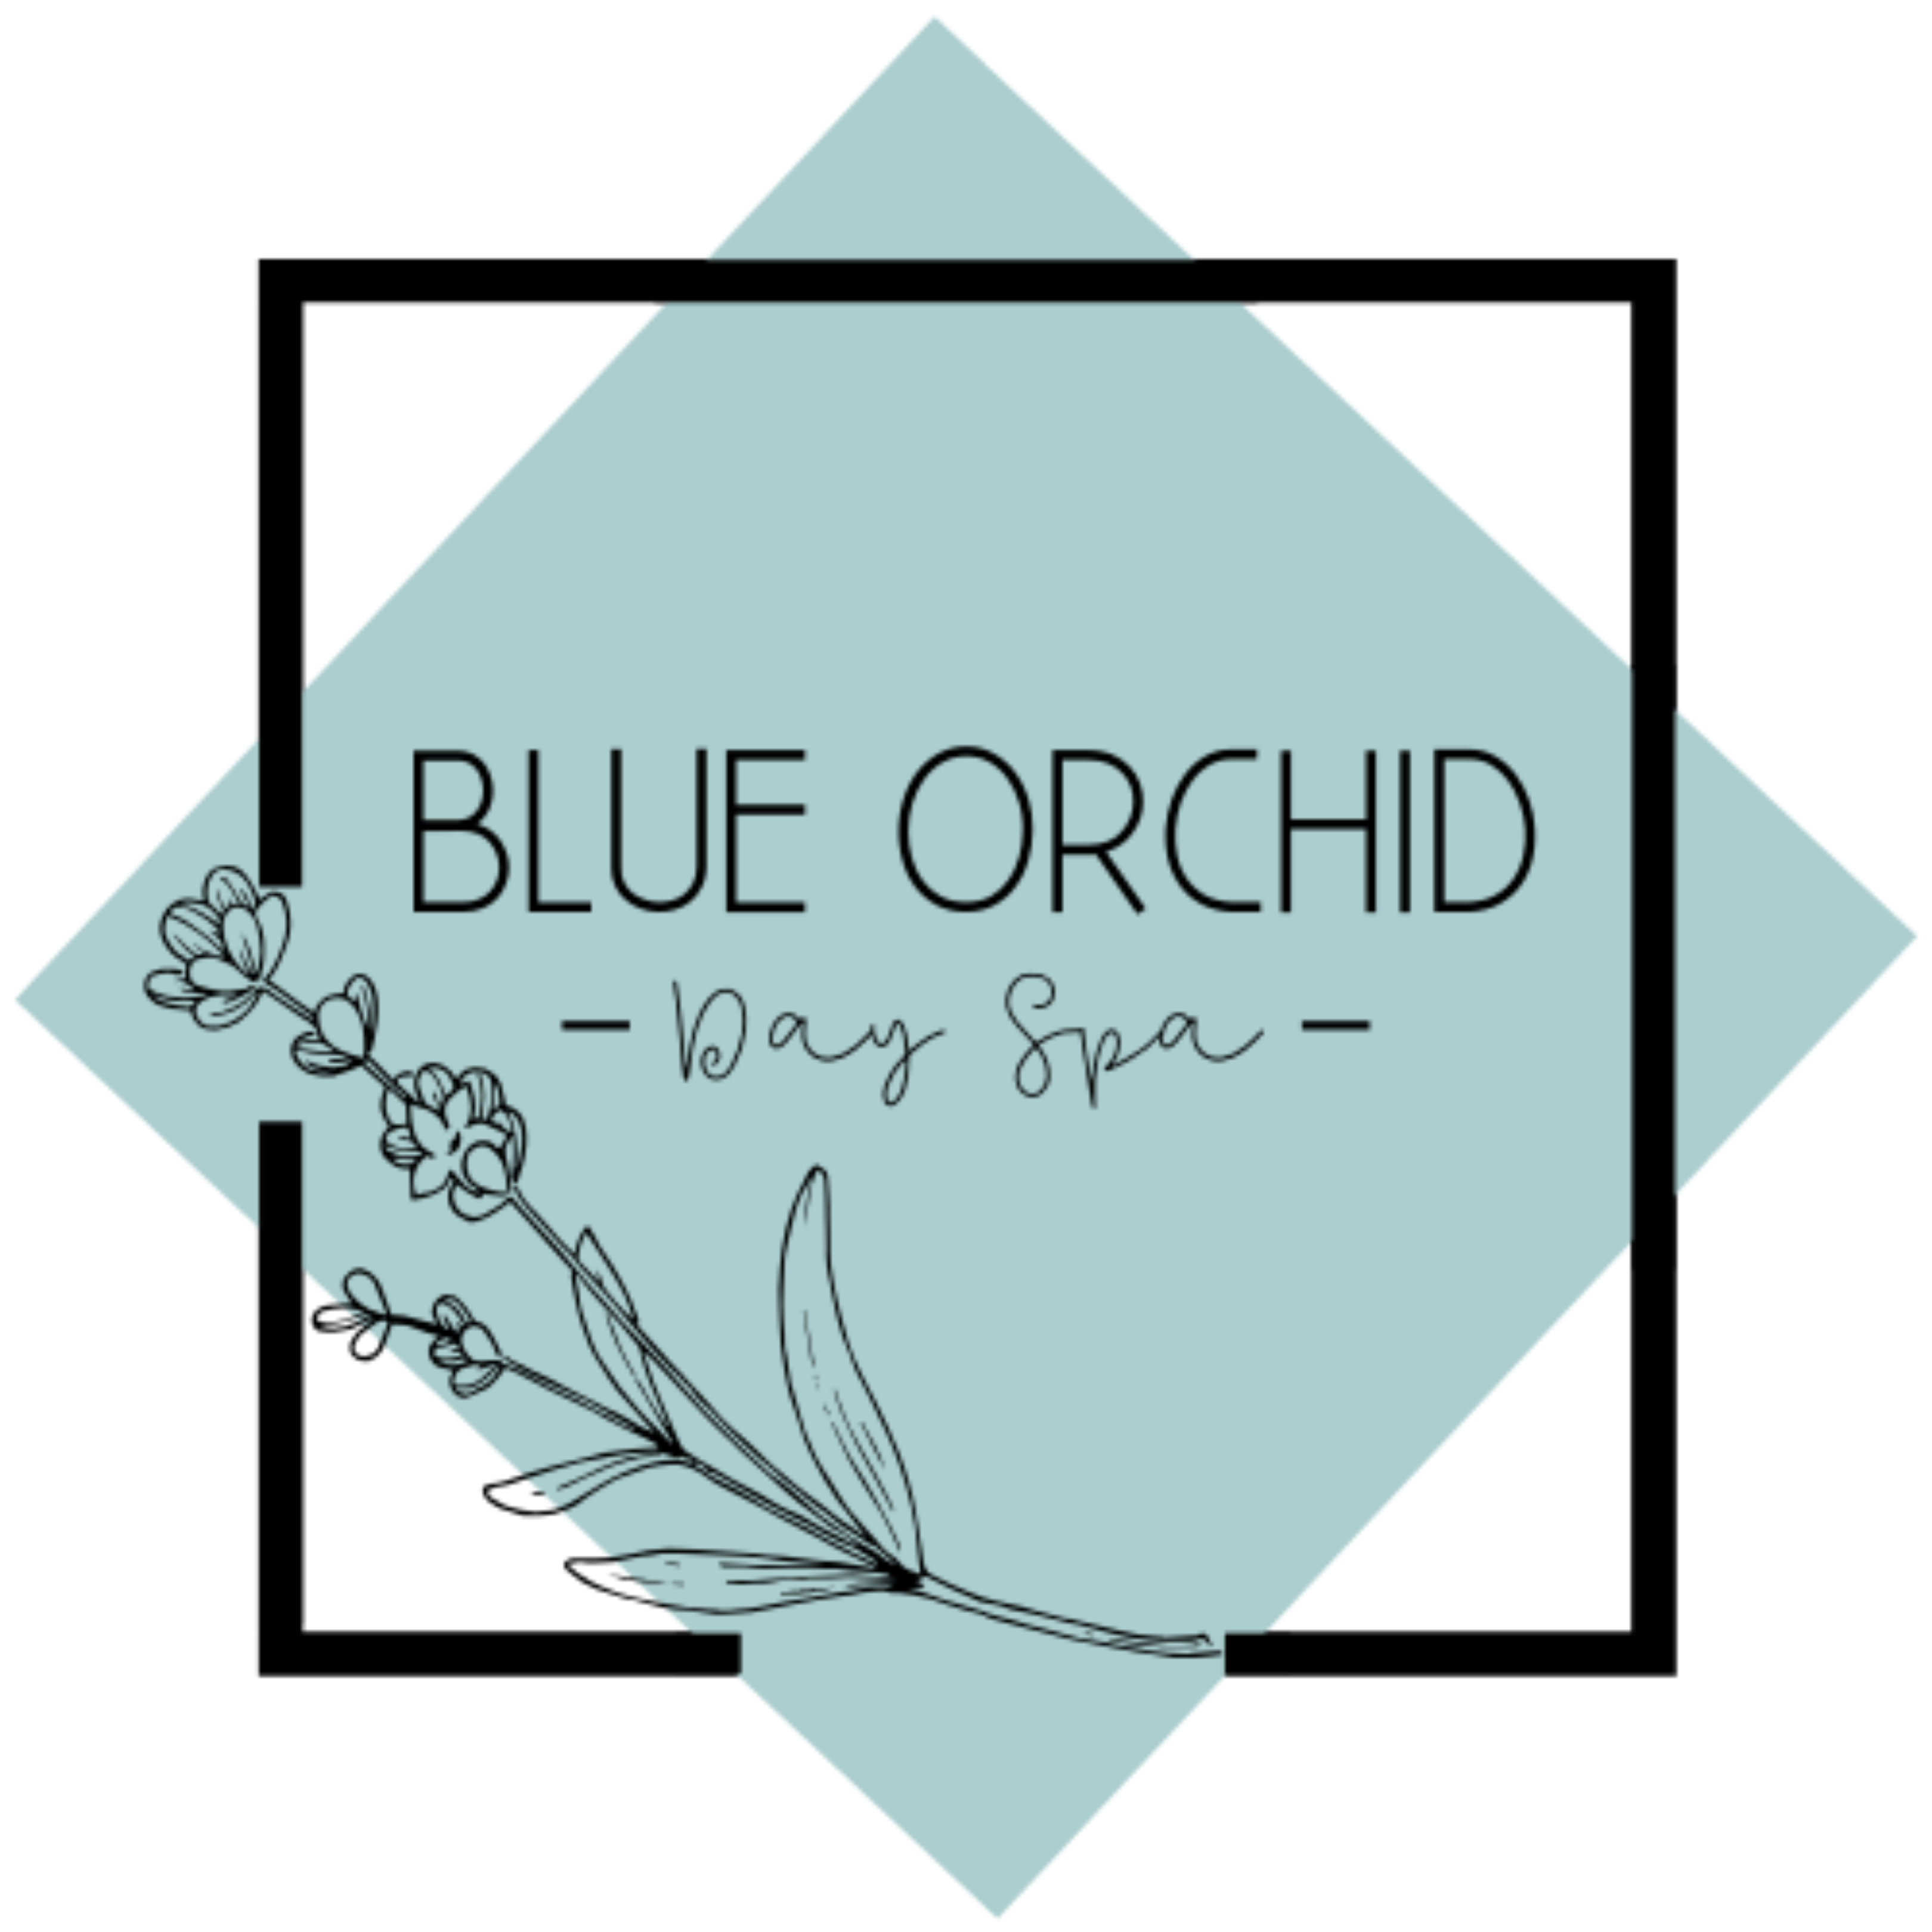 New blue haven orchid Couple brings